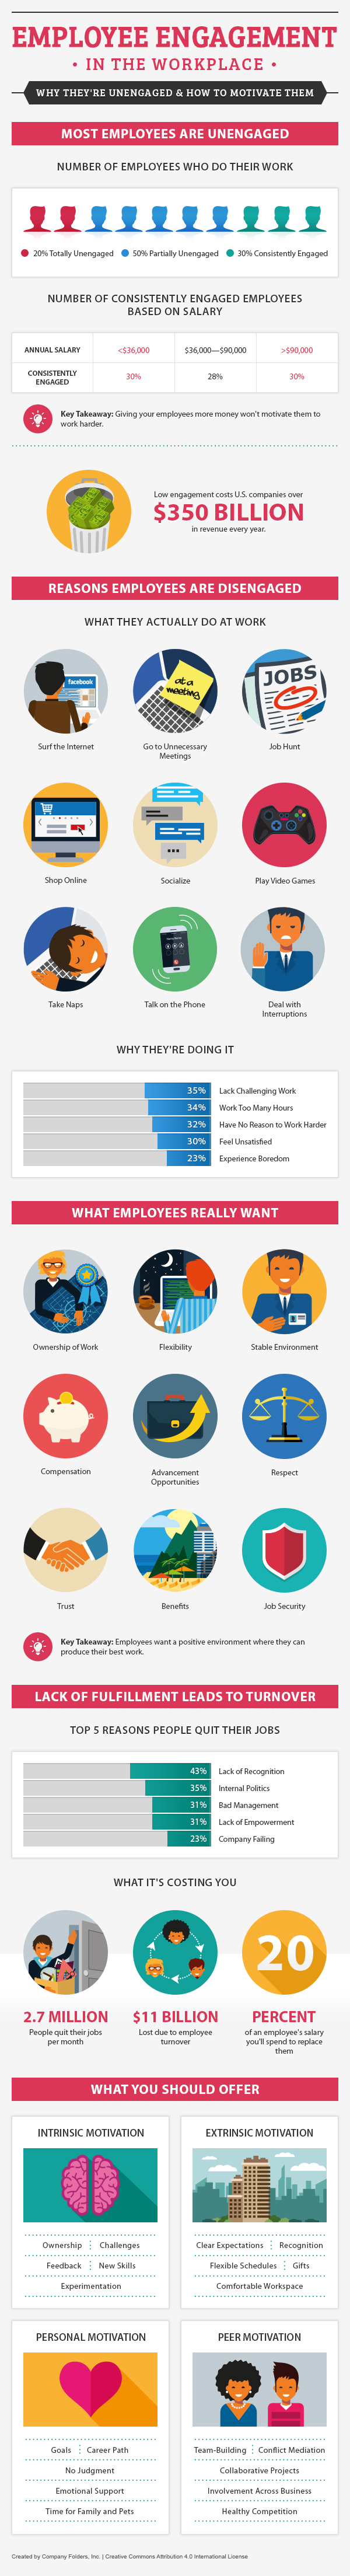 employee-engagement-in-the-workplace